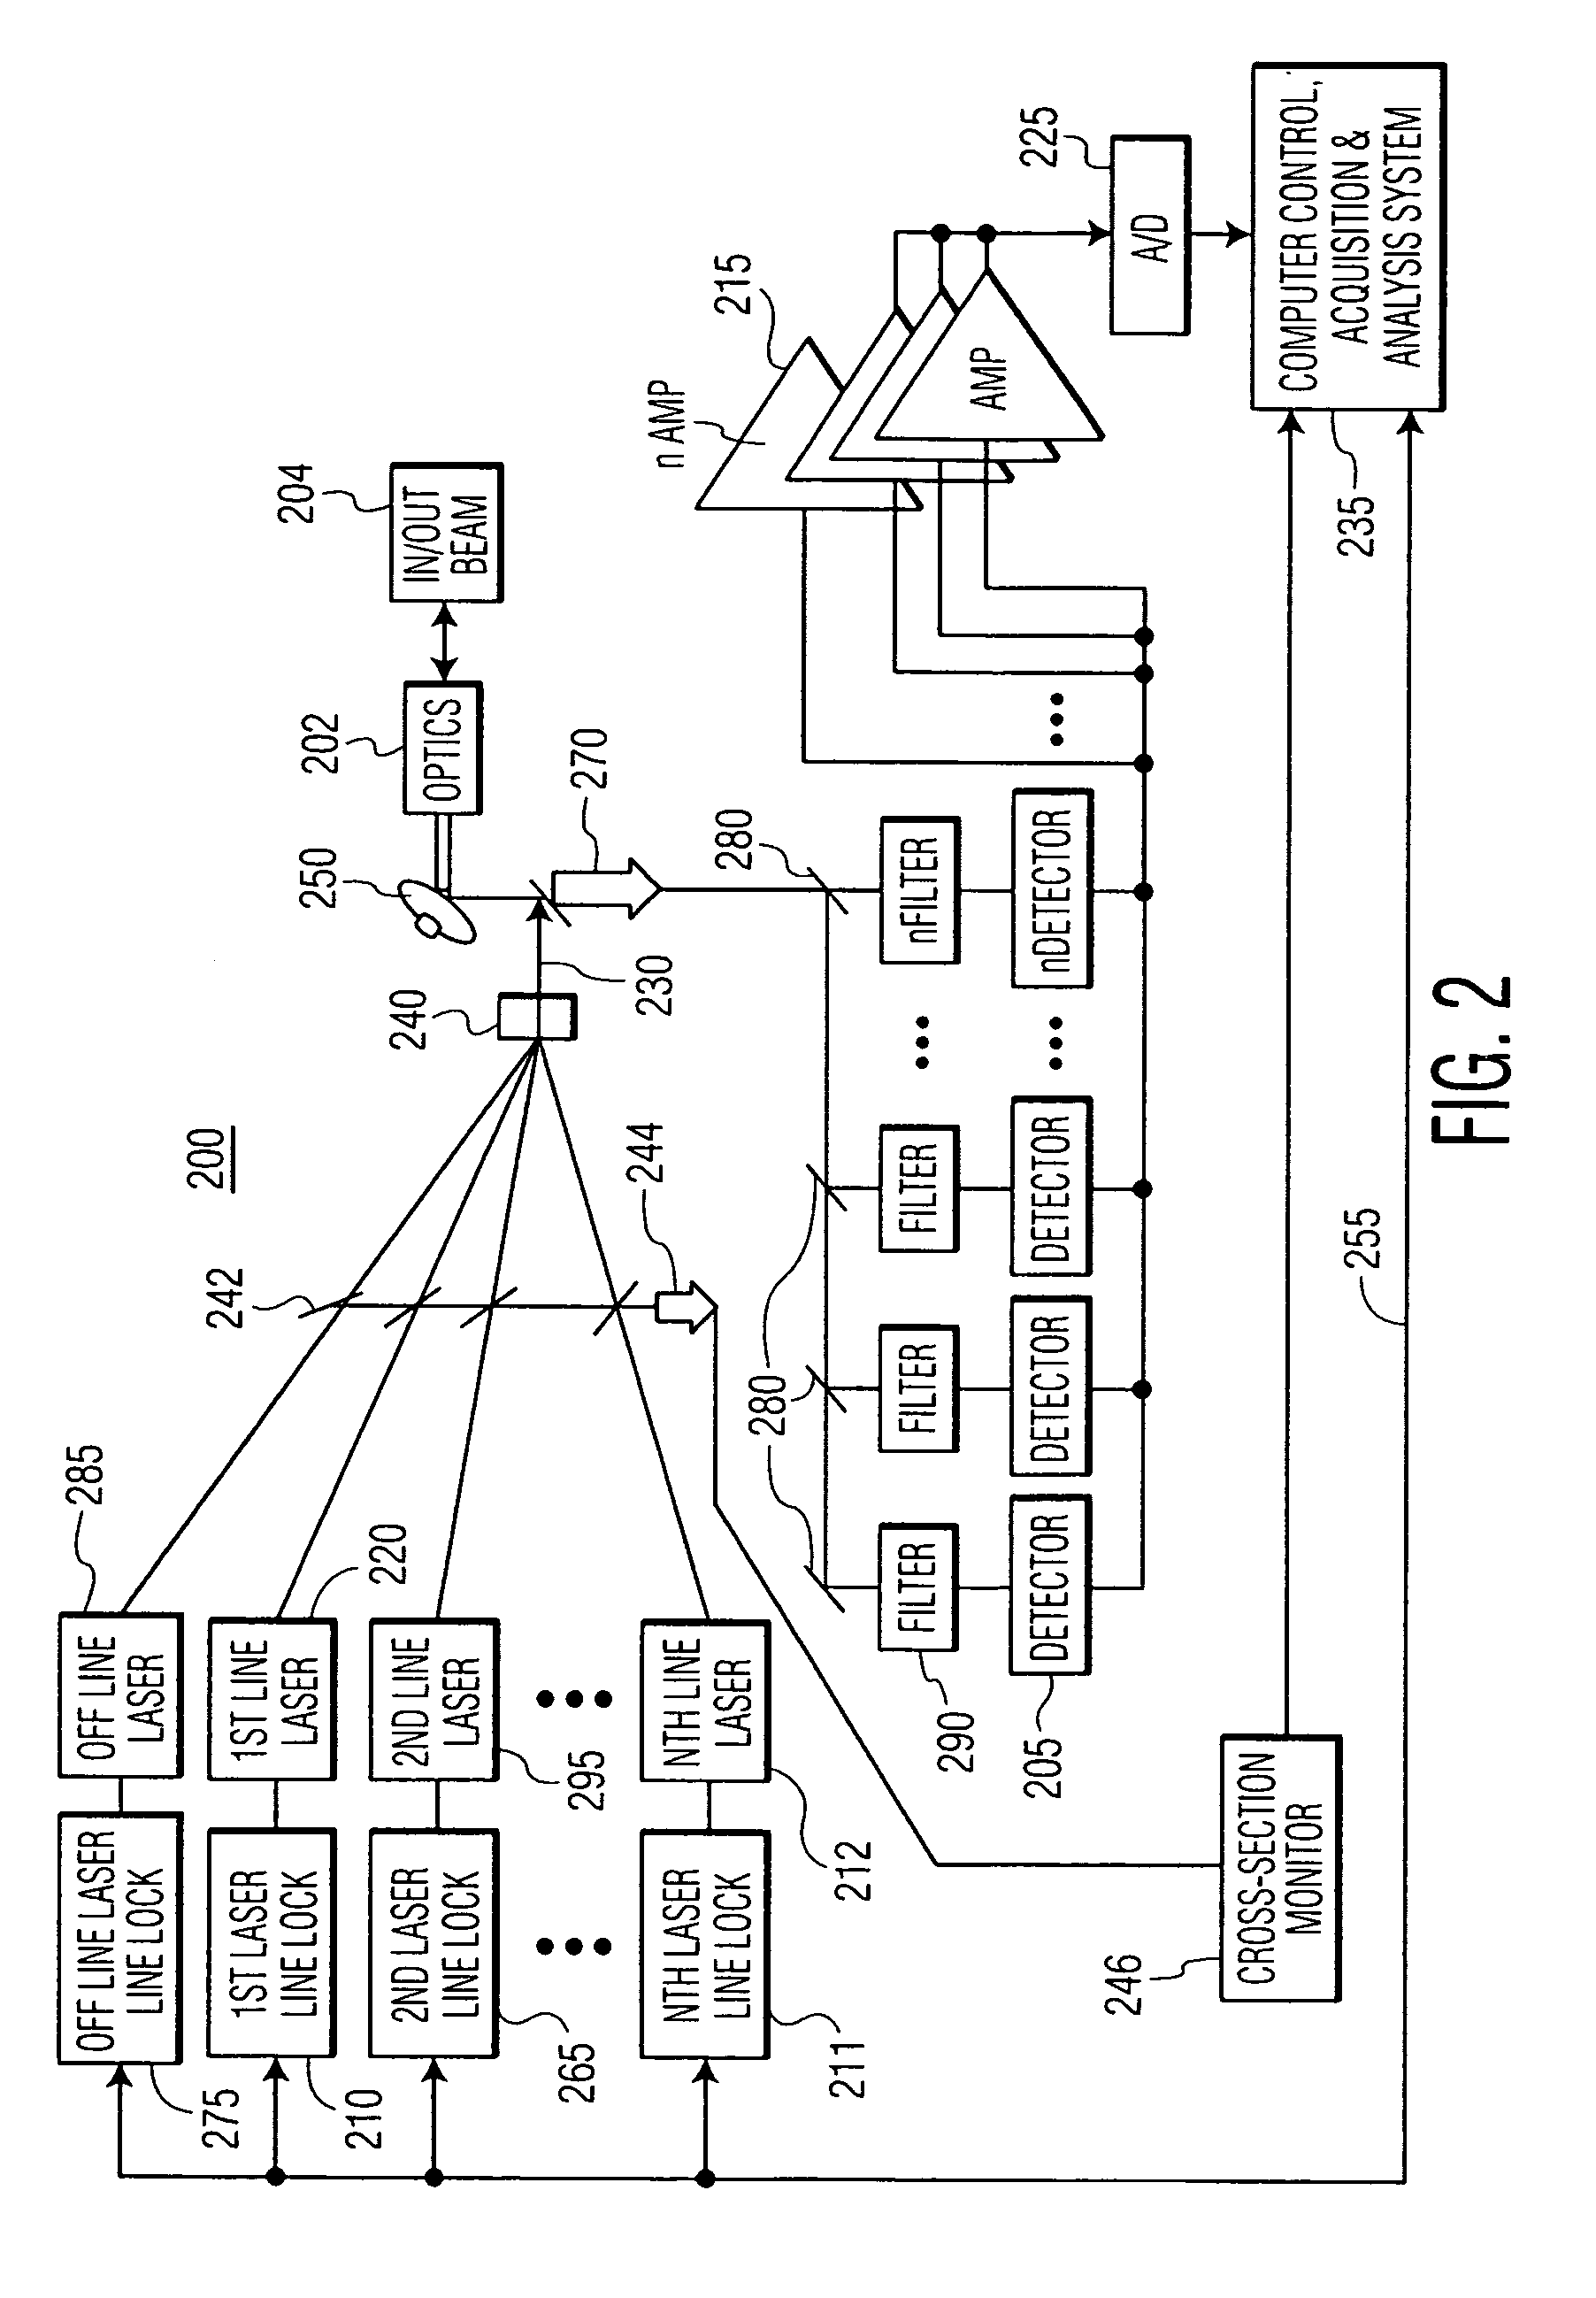 System and method for multi-target fluid concentration detection and mapping